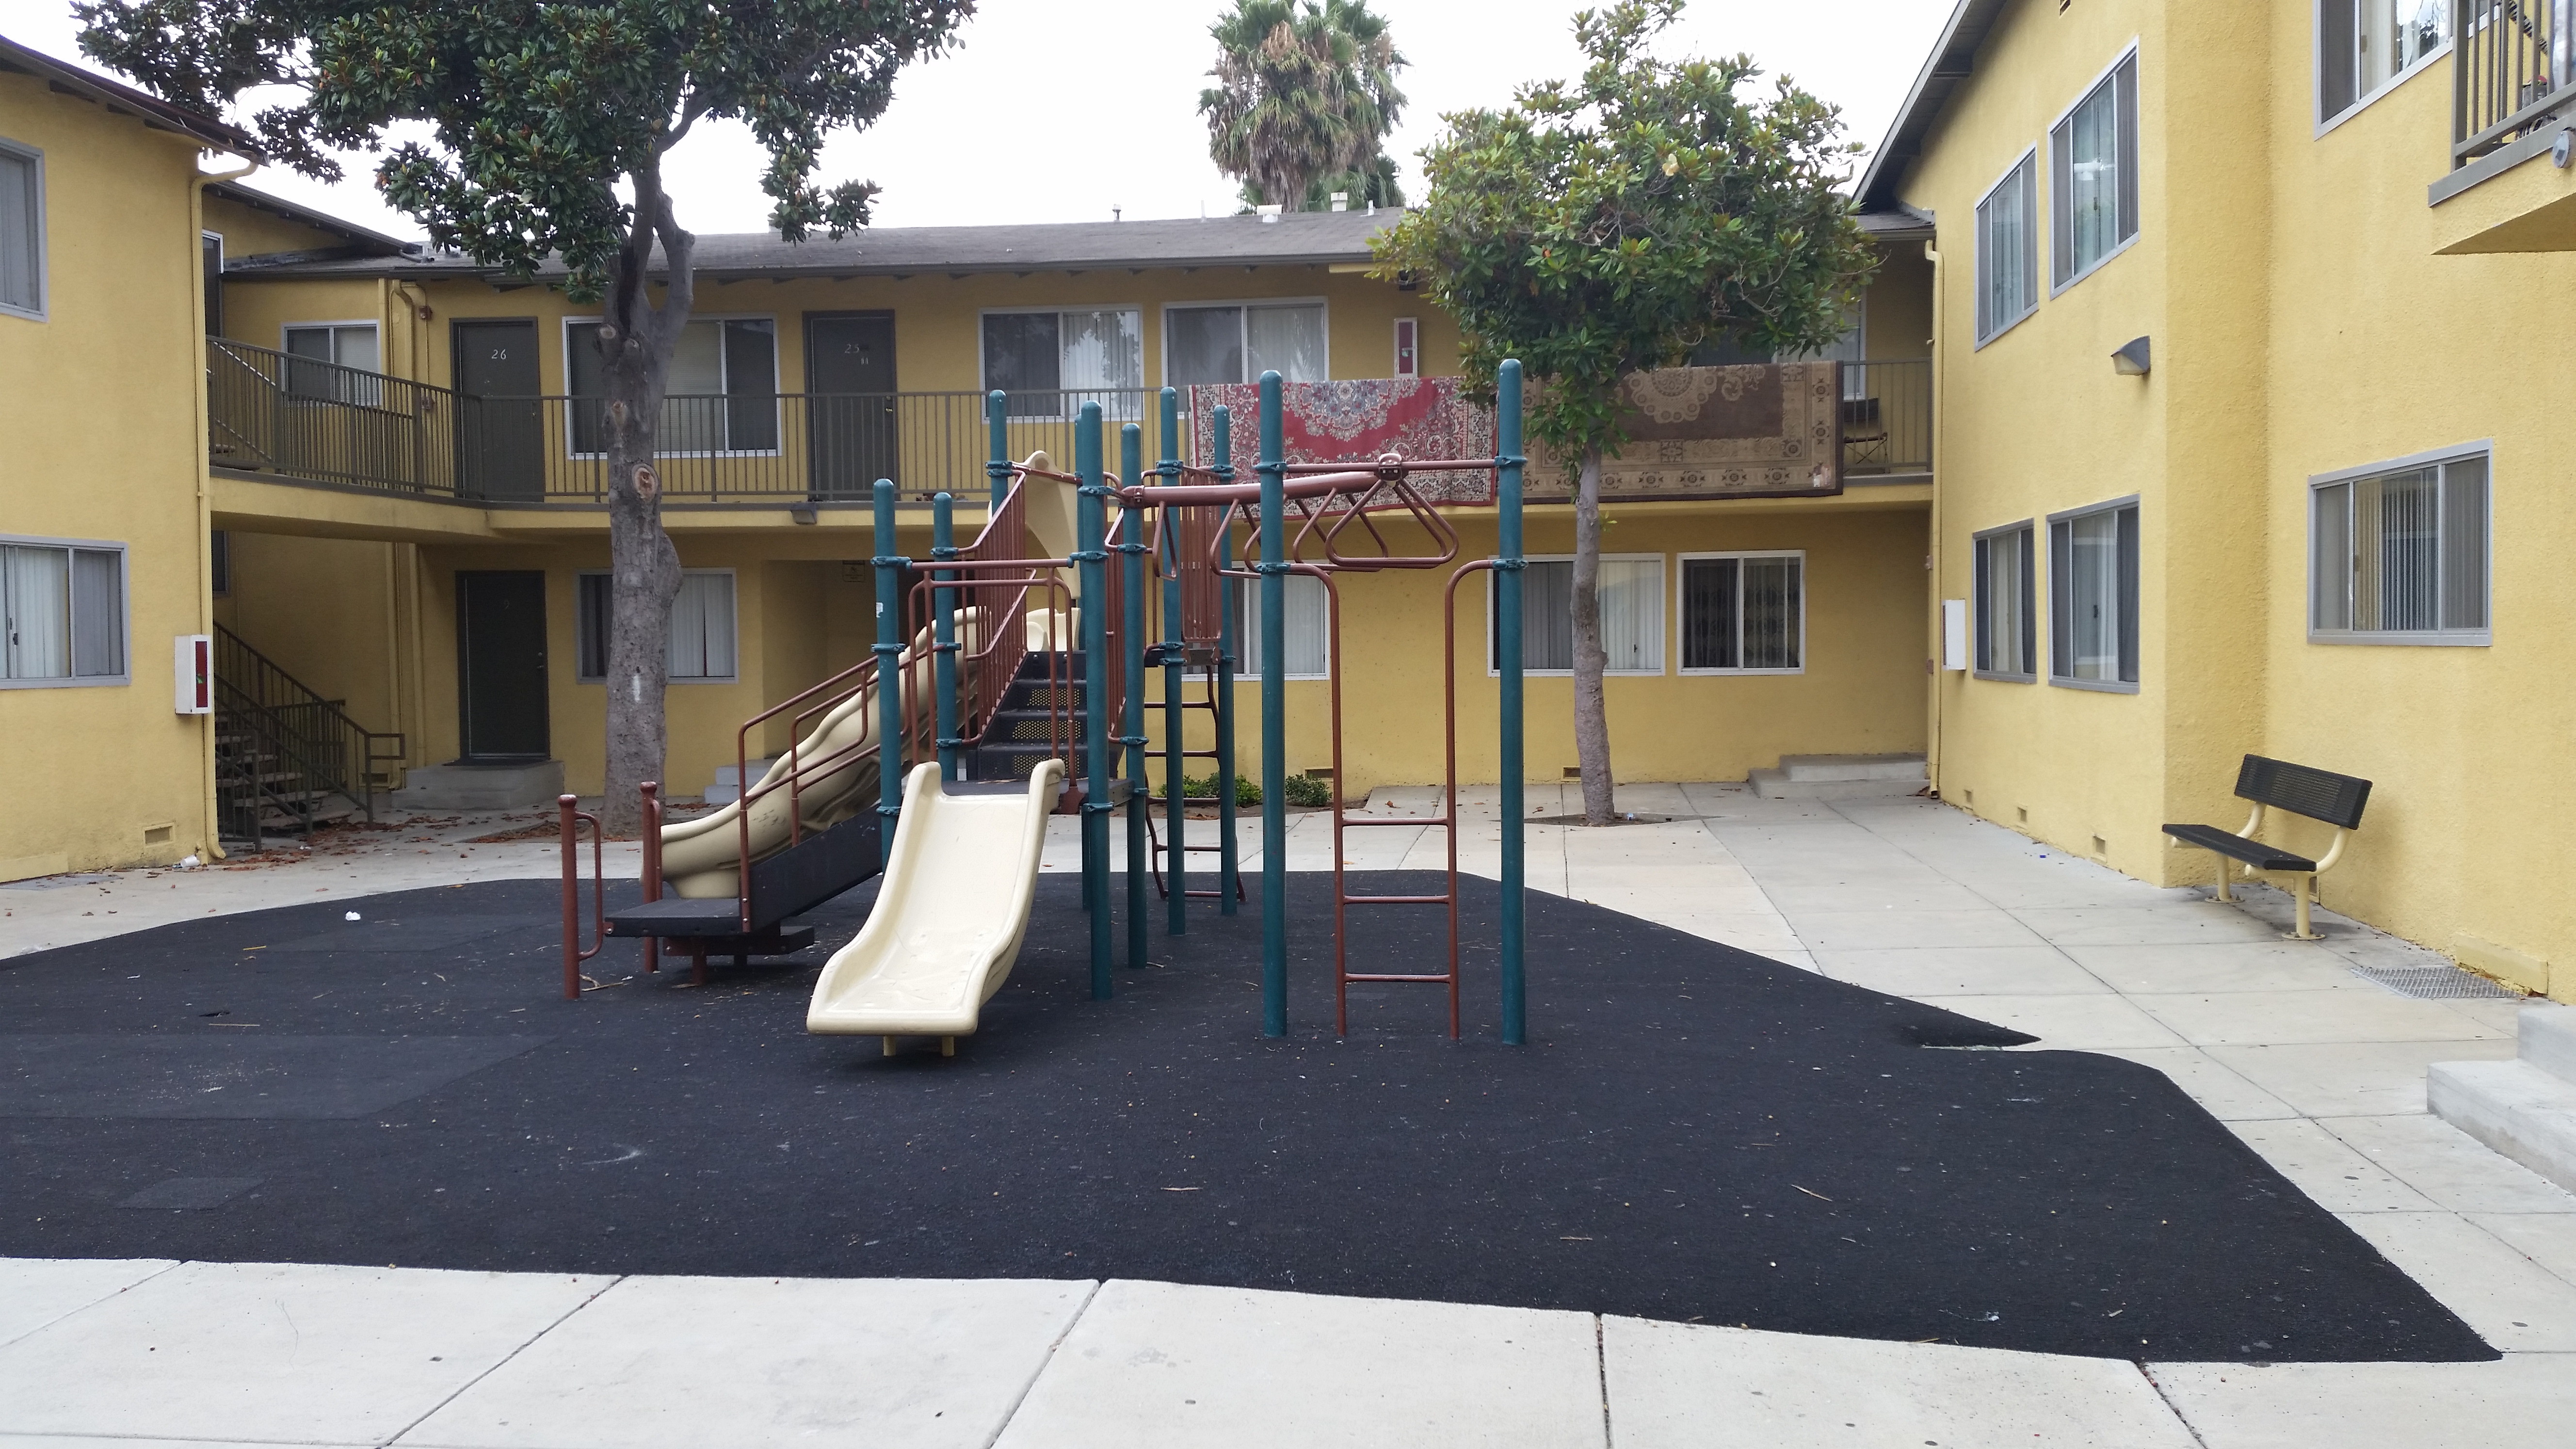 Image of the building playground